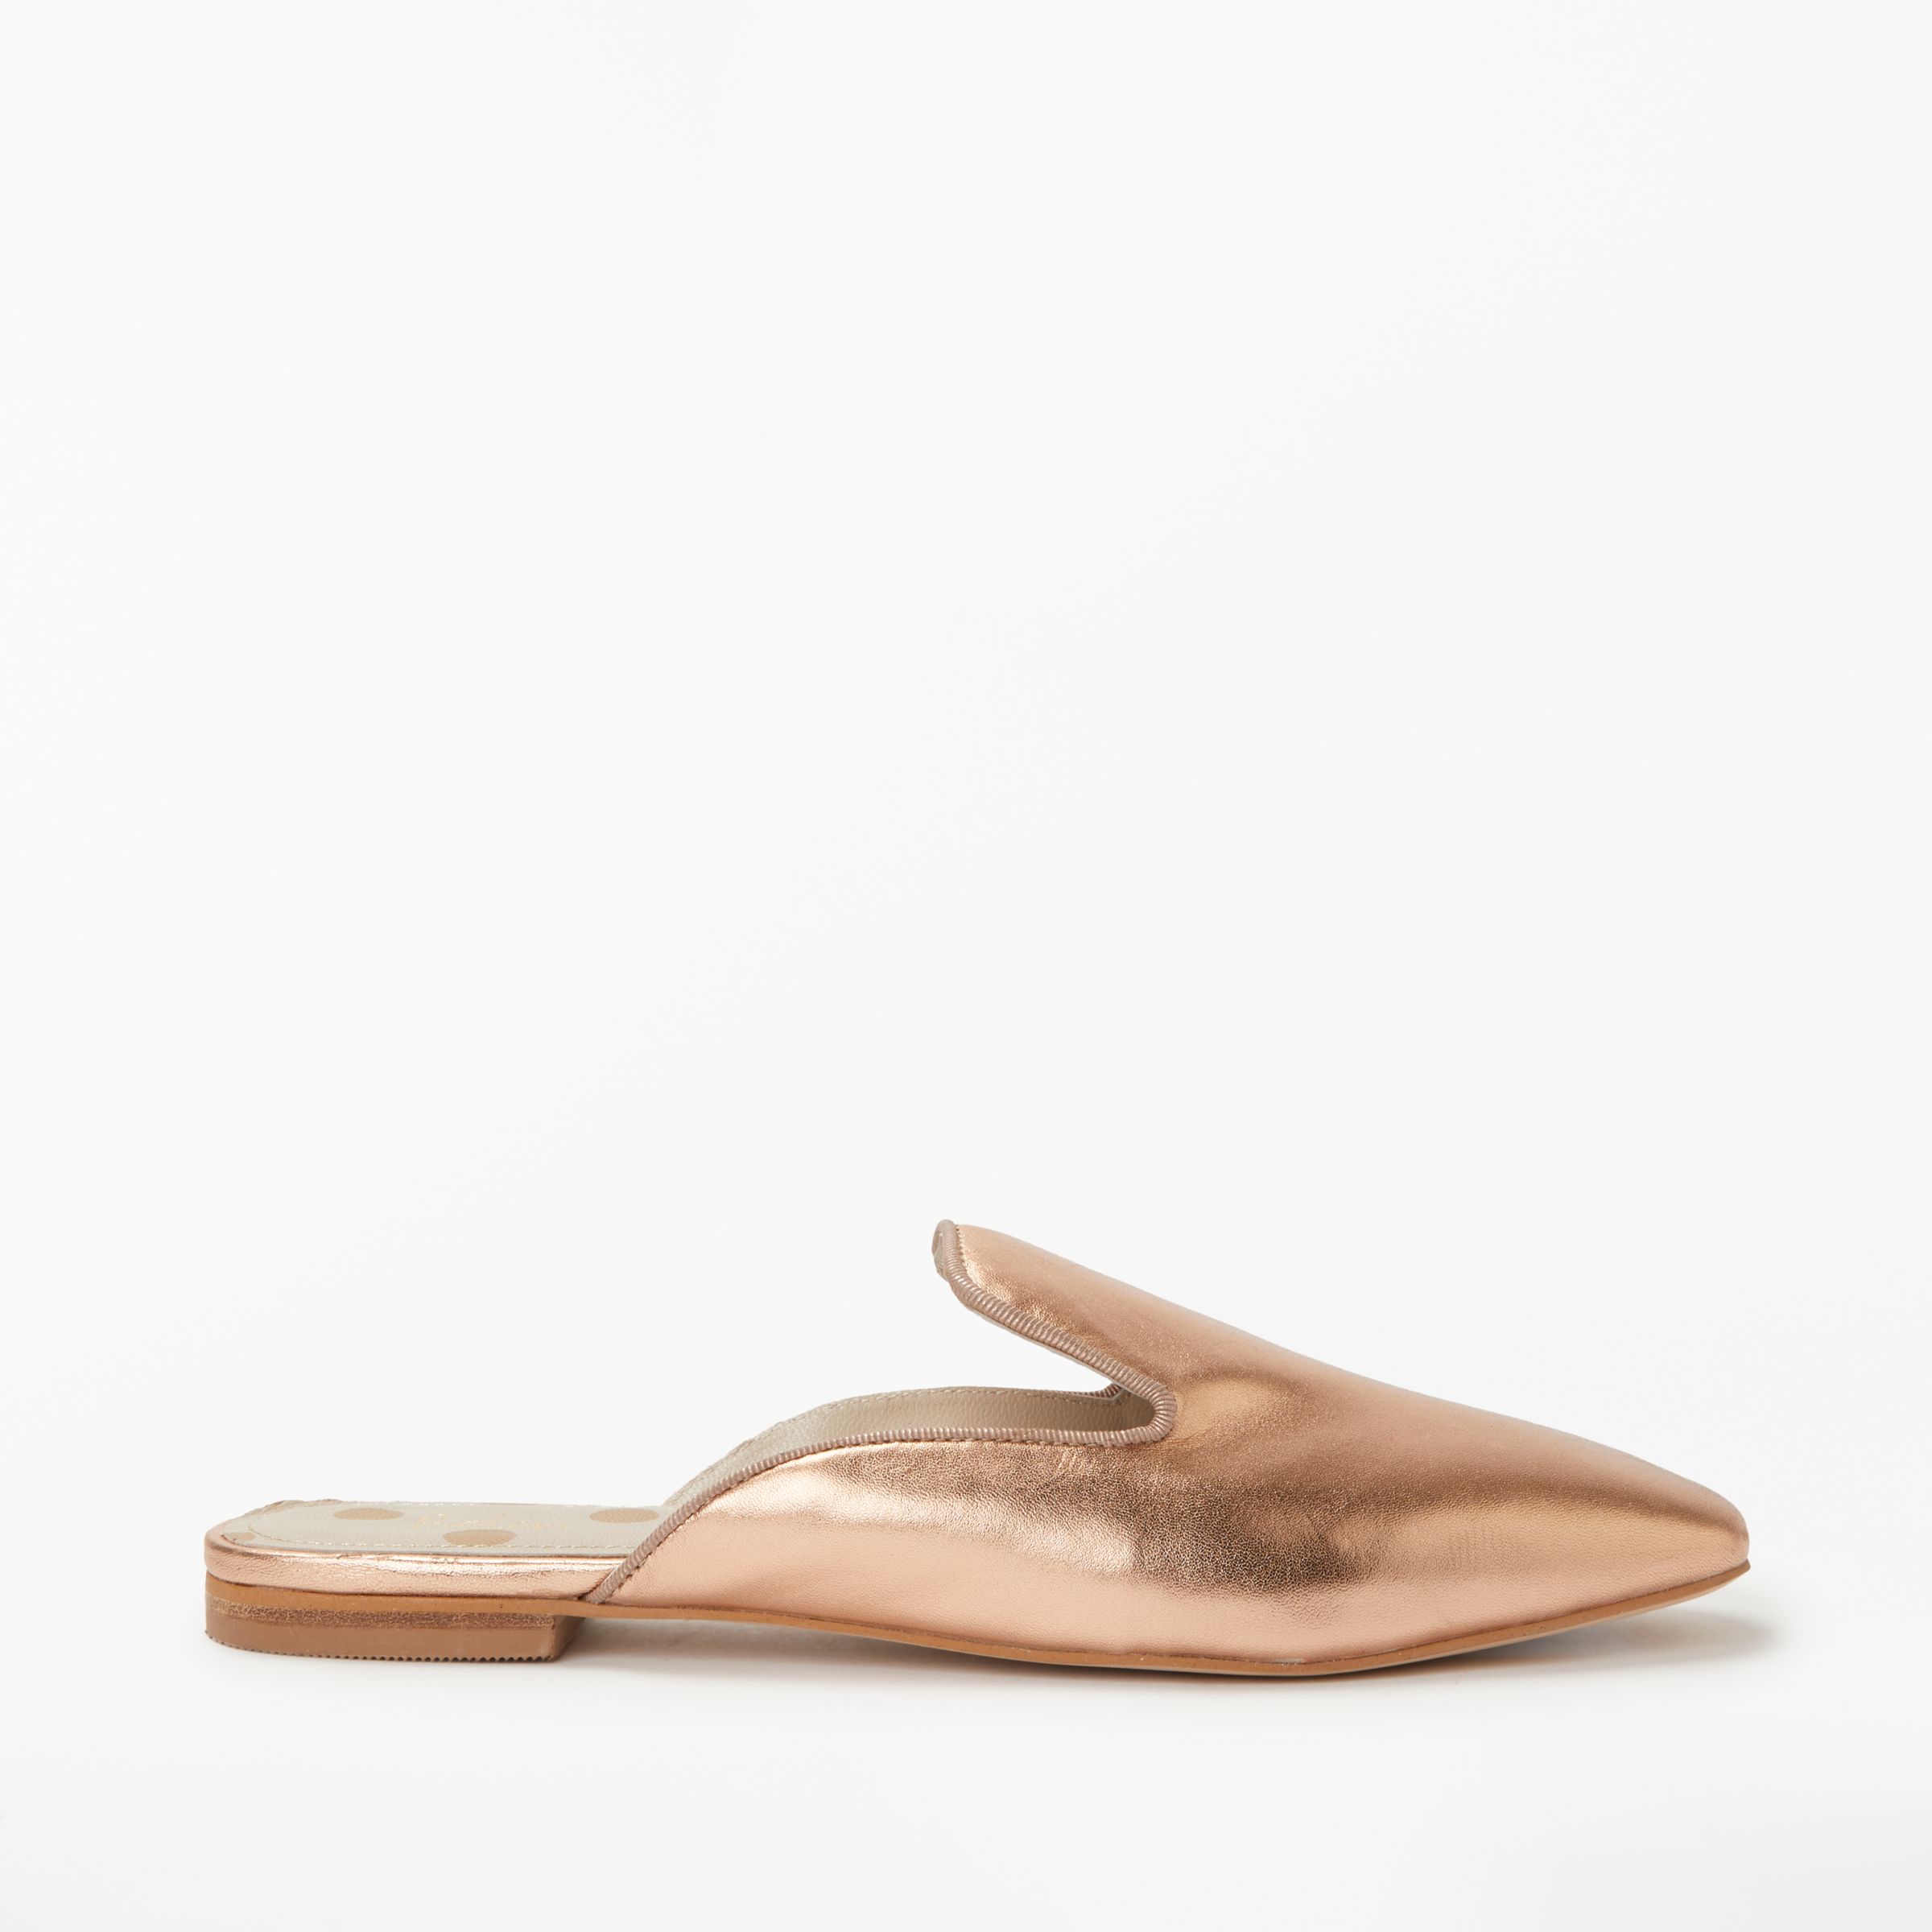 Boden Poppy Metallic Loafers, Rose Gold Leather